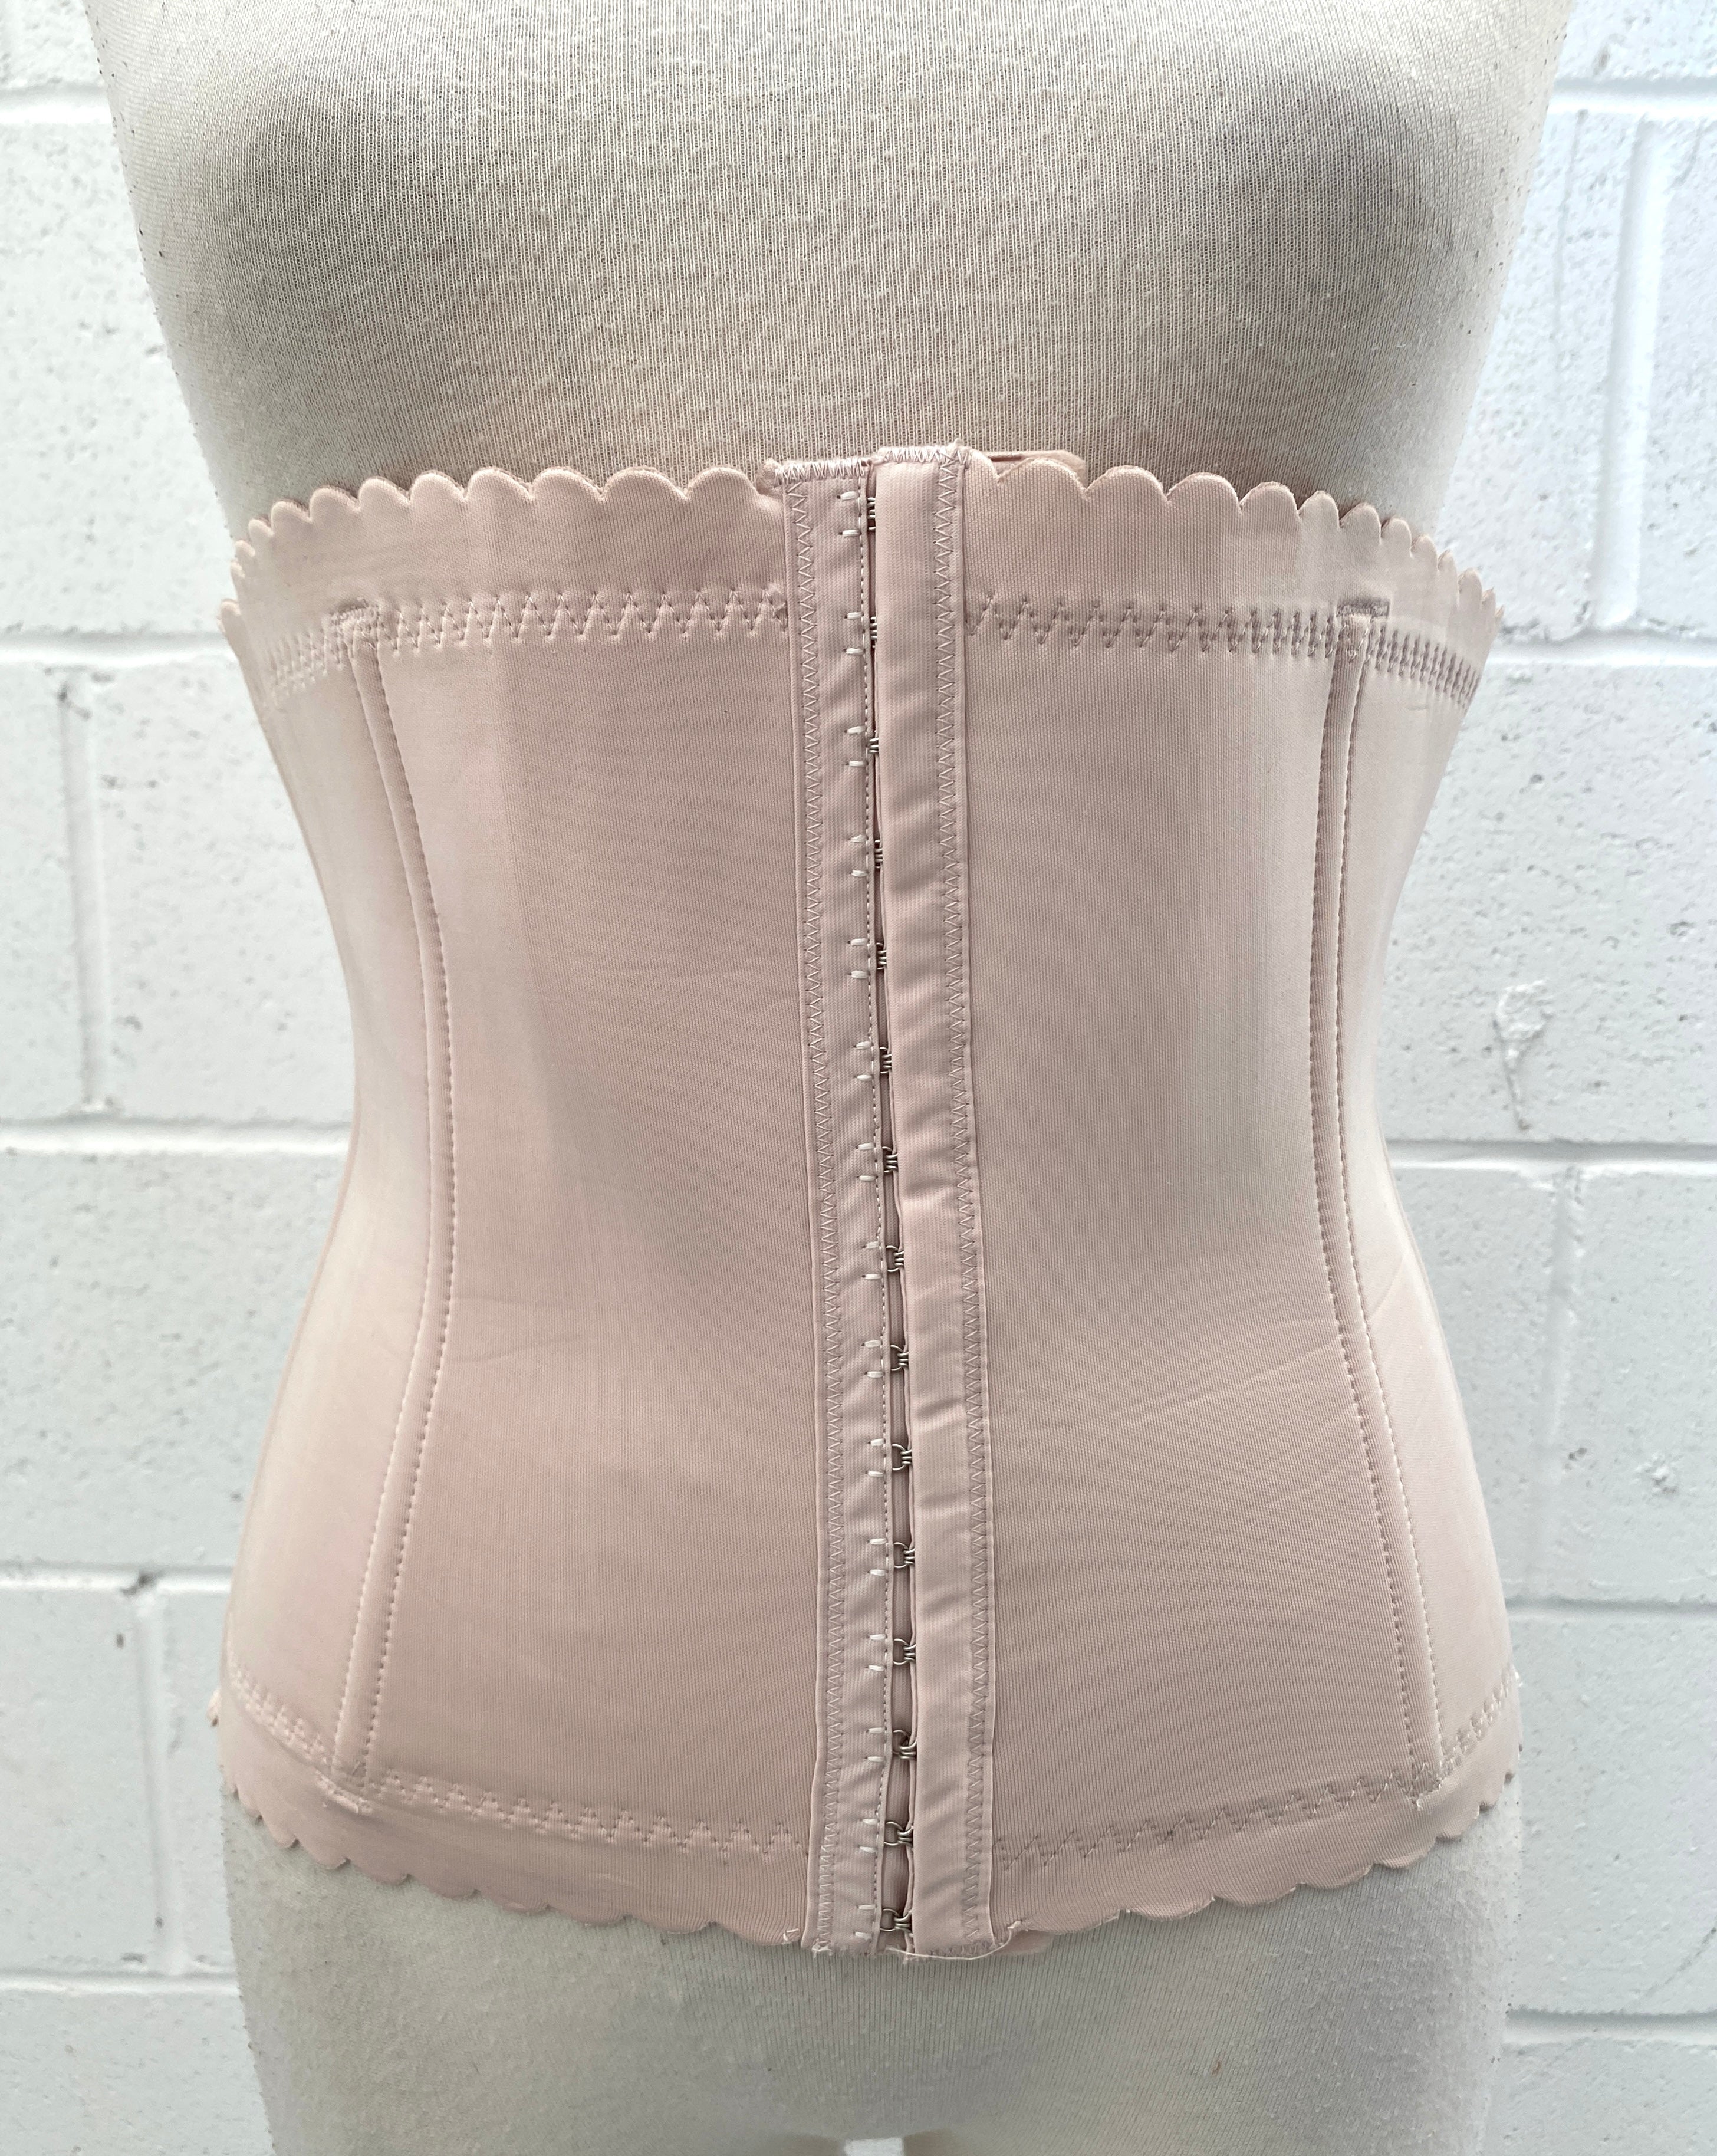 Vintage 1930s One Piece Girdle XL Art Deco All in One Shaping Girdle  Vintage Girdle Corsalet -  Canada